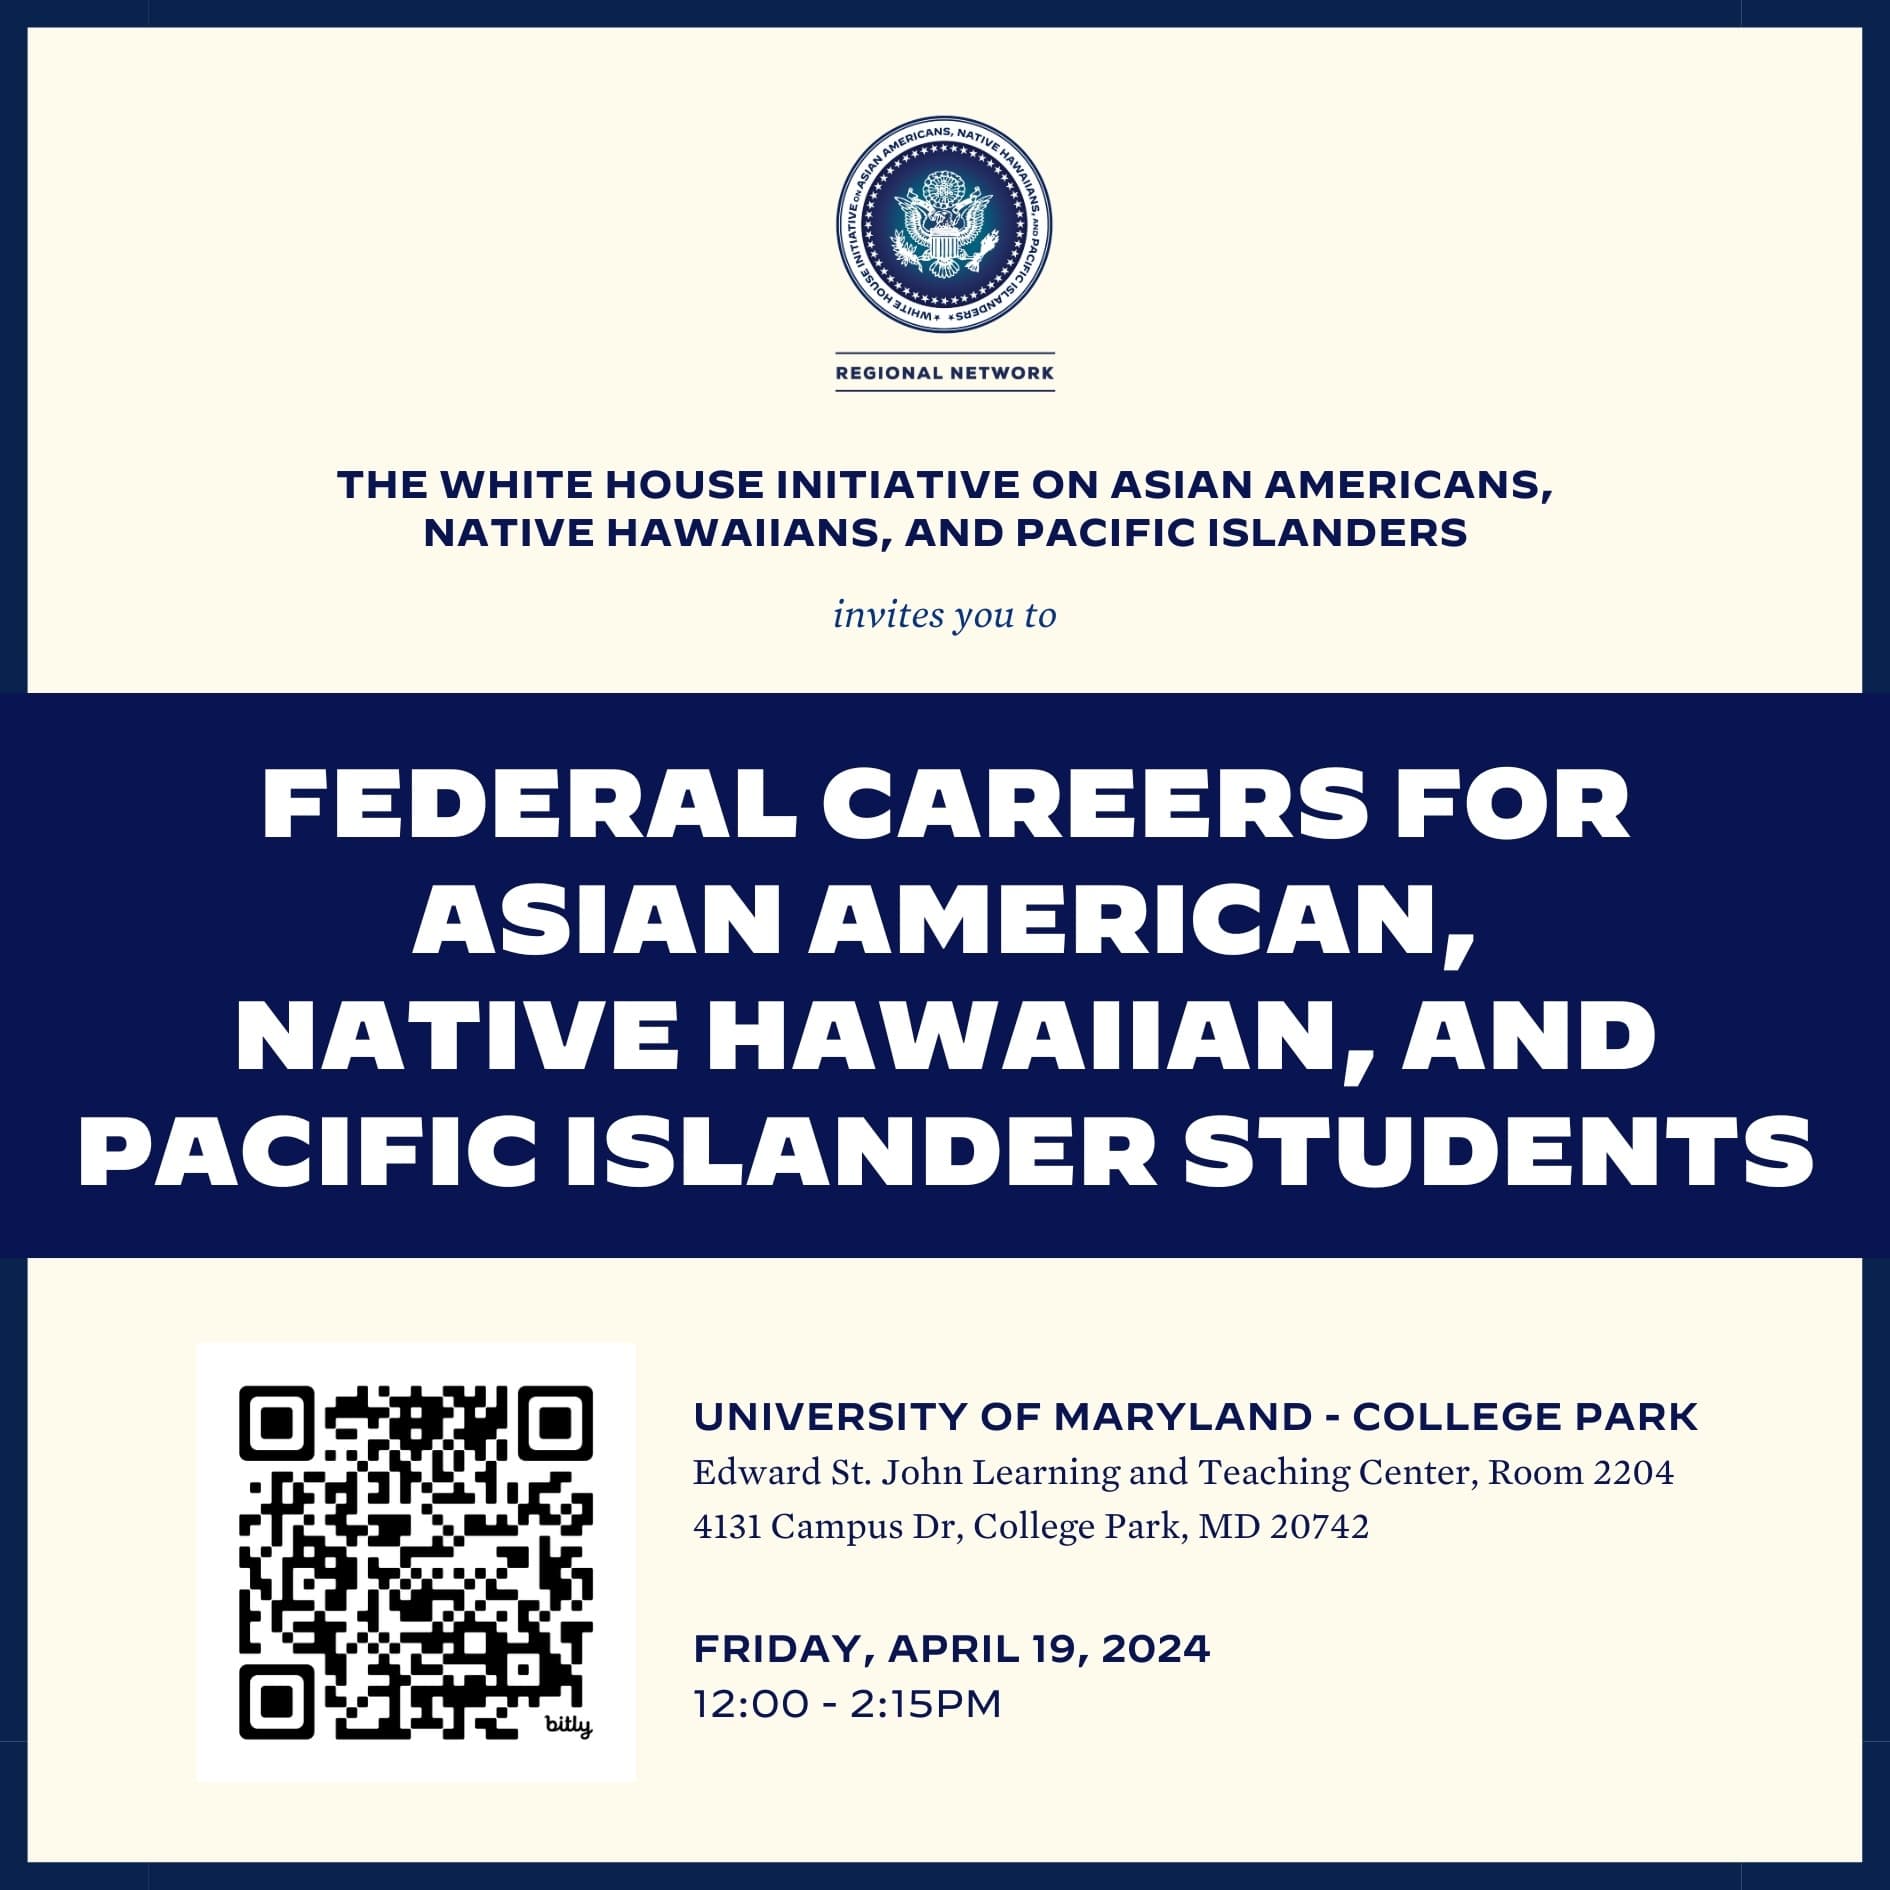 The White House Initiative on Asian Americans, Native Hawaiians, and Pacific Islanders invites you to Federal Careers for Asian American, Native Hawaiian, and Pacific Islander Students. UMD, Edward St. John Learning and Teaching Center, Room 2204, Friday, April 19, 2024, 12:00PM - 2:15PM